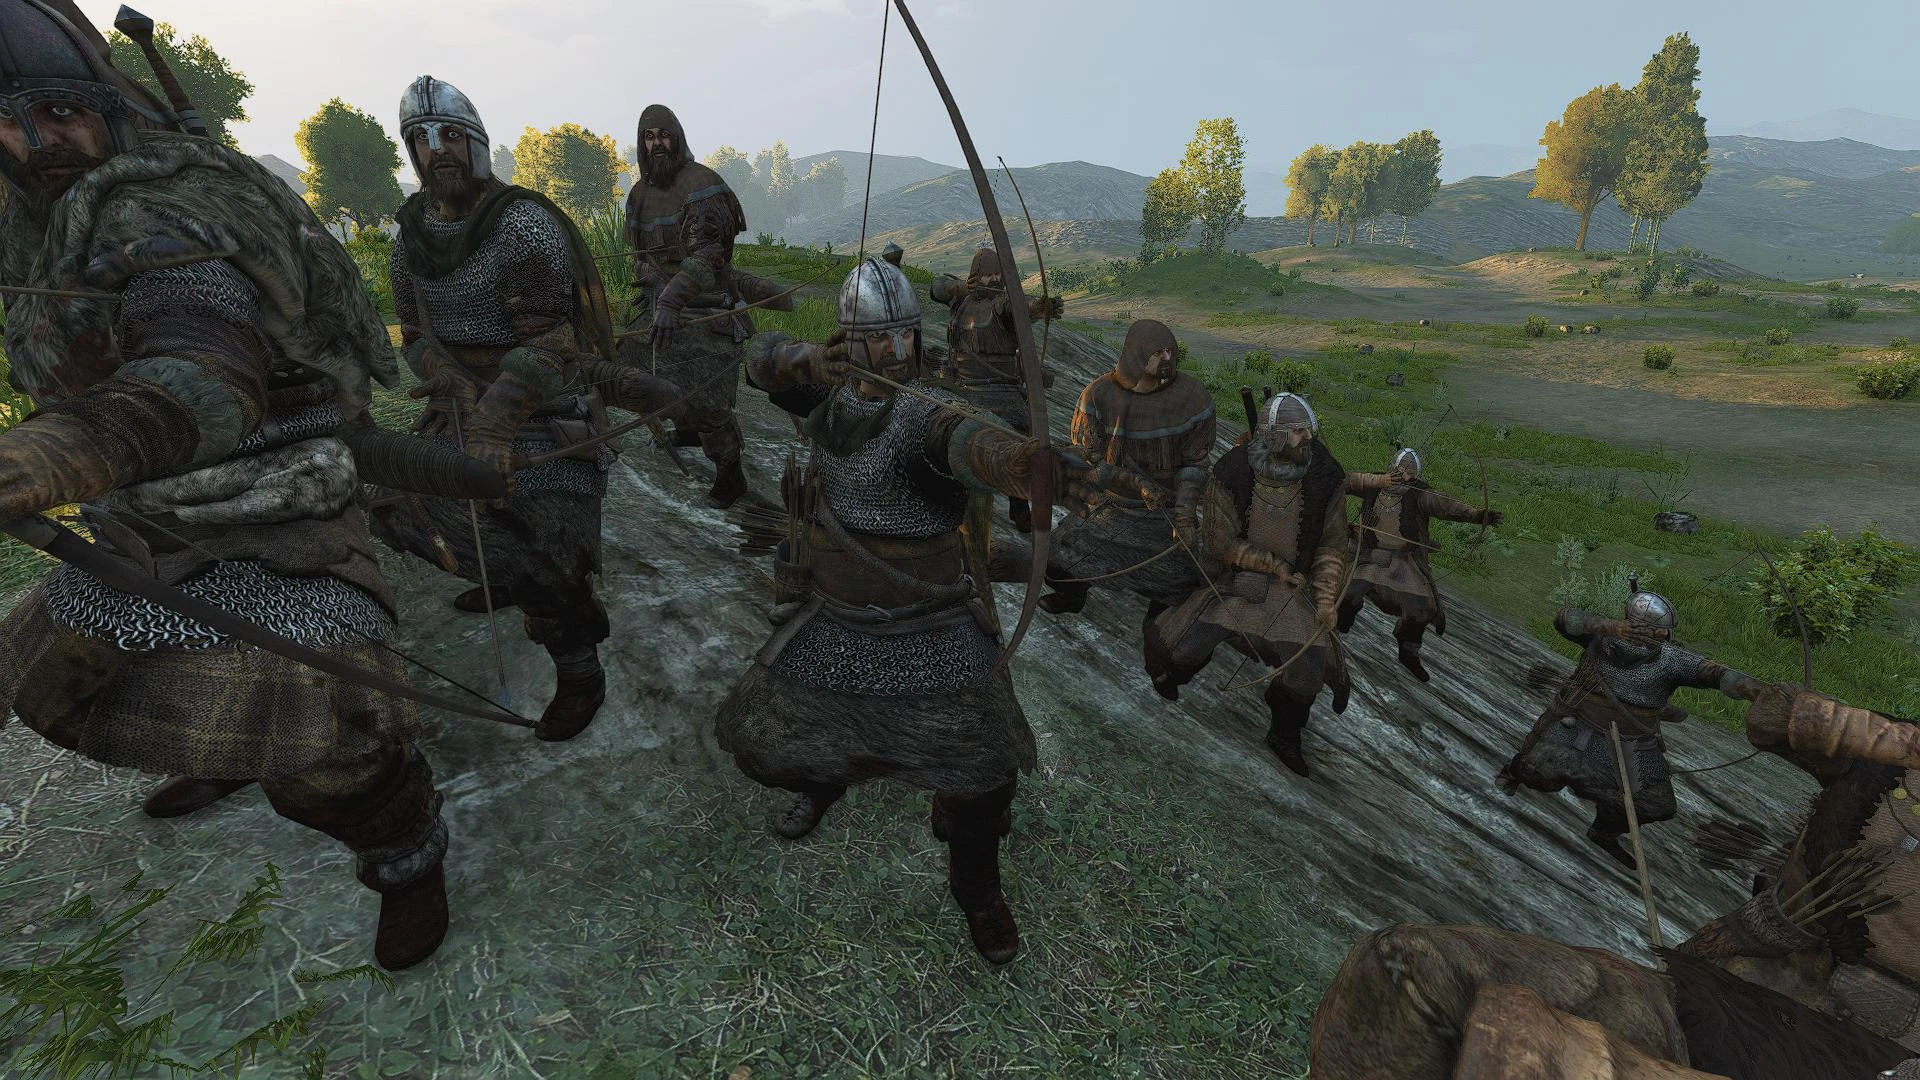 mount and blade wiki aiming